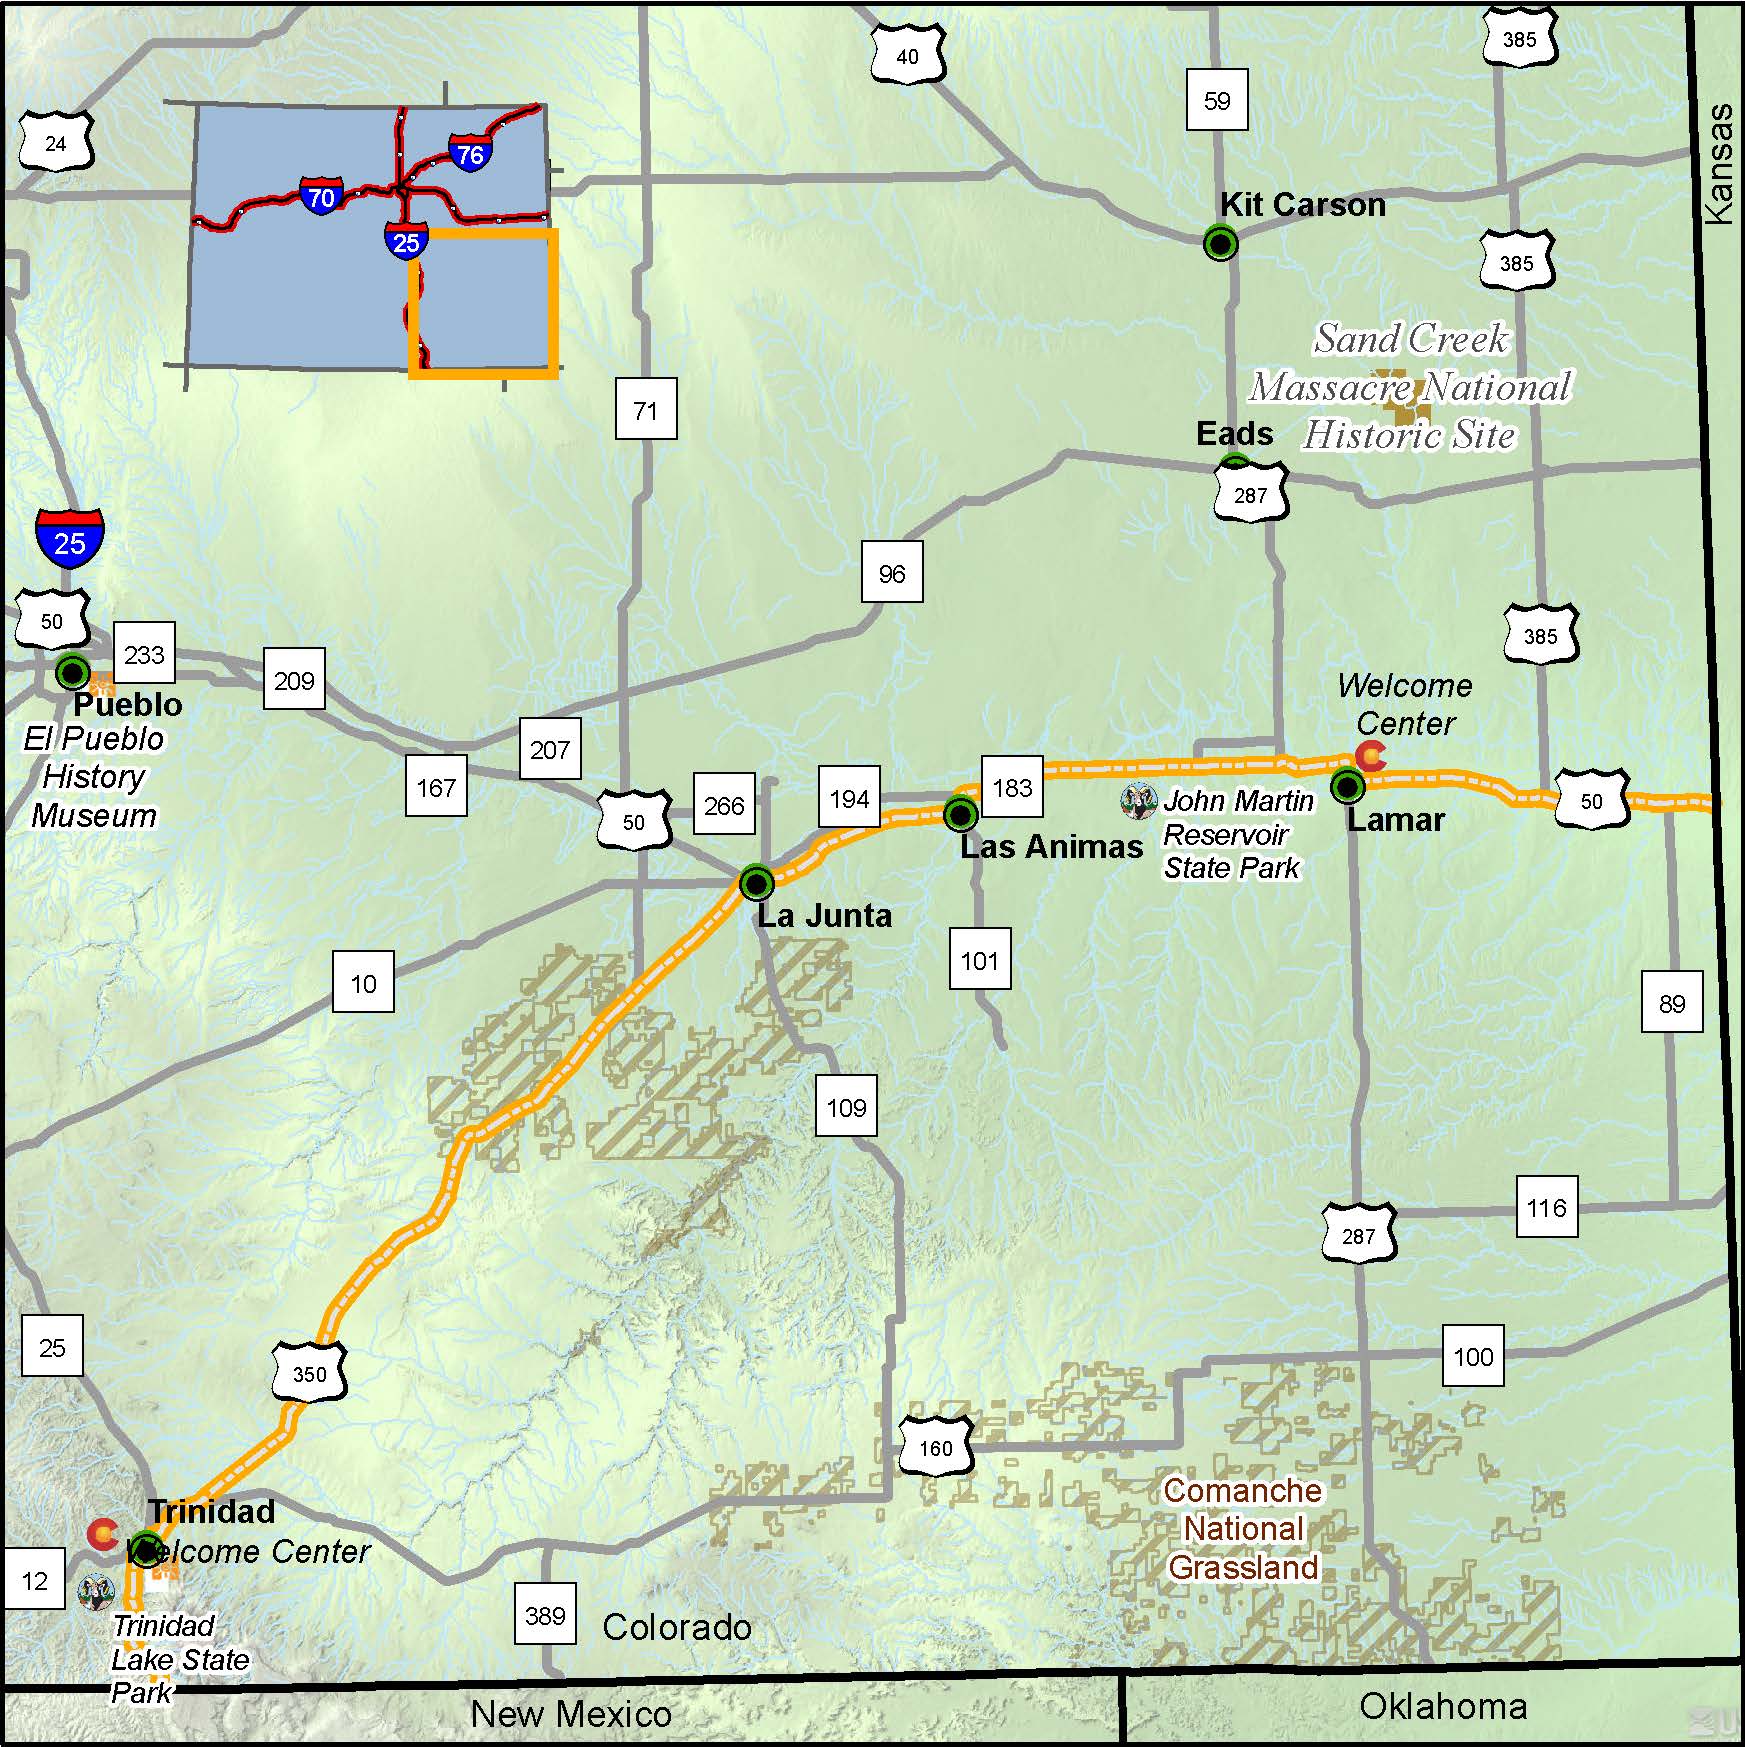 Santa Fe Trail Scenic Byway map detail image